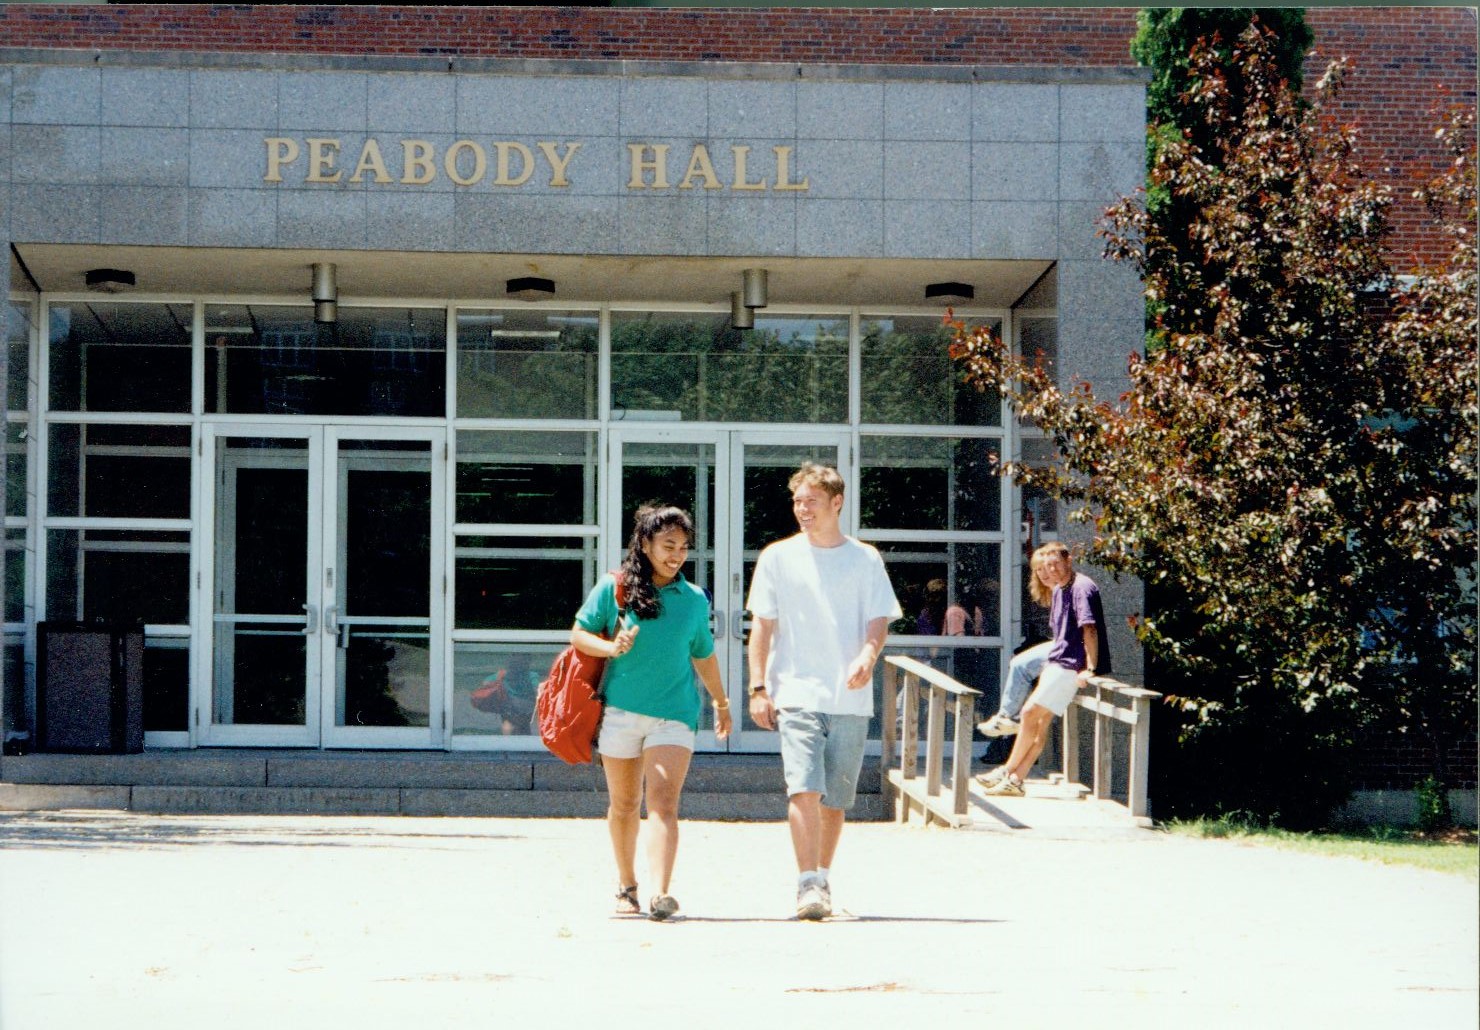 Peabody Hall is the home of Husson University's College of Business.